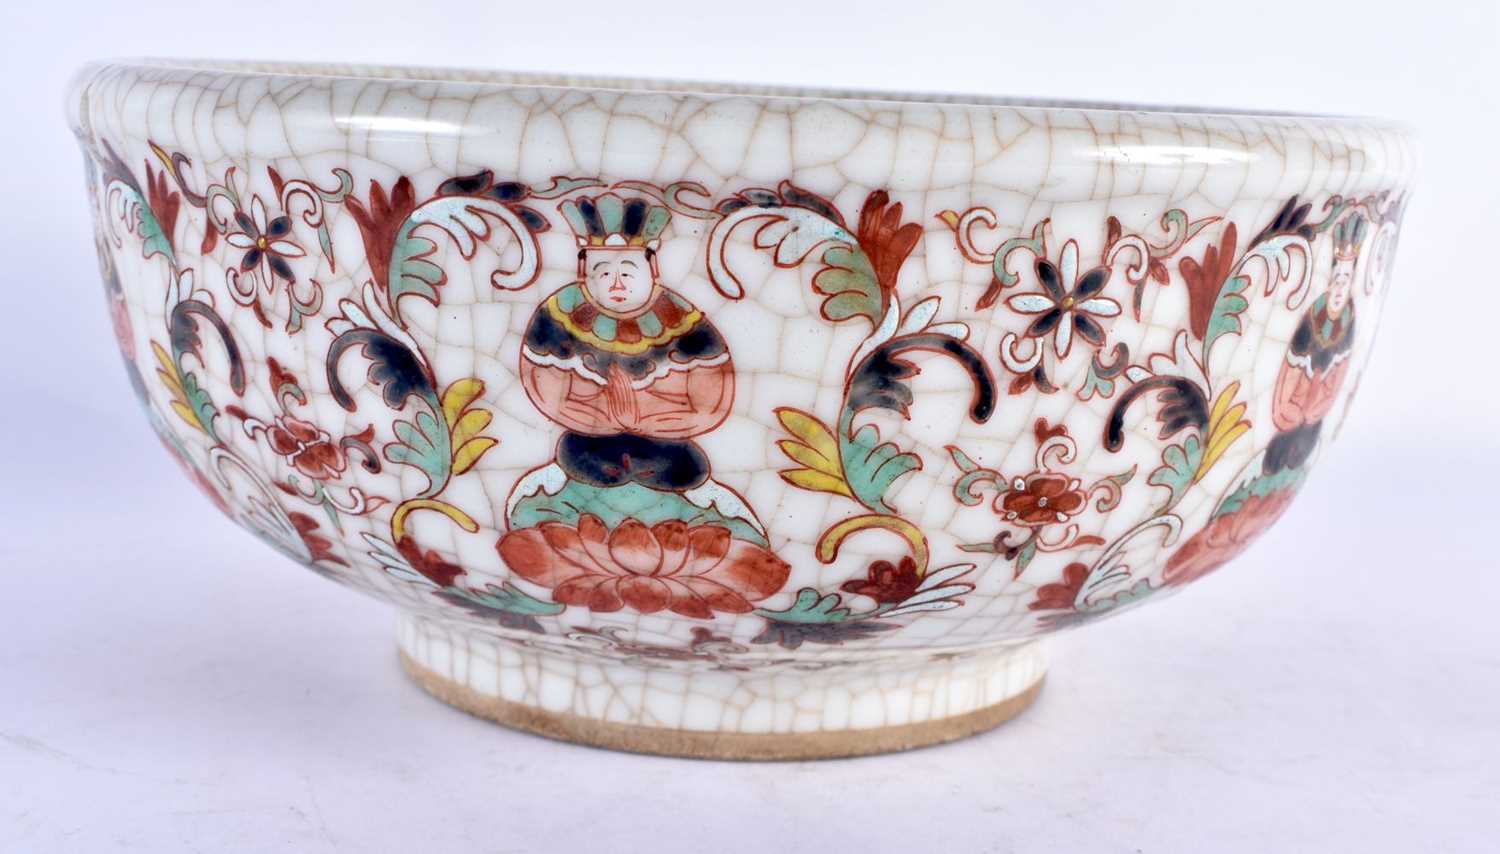 A CHINESE QING DYNASTY CRACKLED THAI MARKET BOWL painted with figures and foliage. 22 cm x 9 cm. - Image 4 of 5